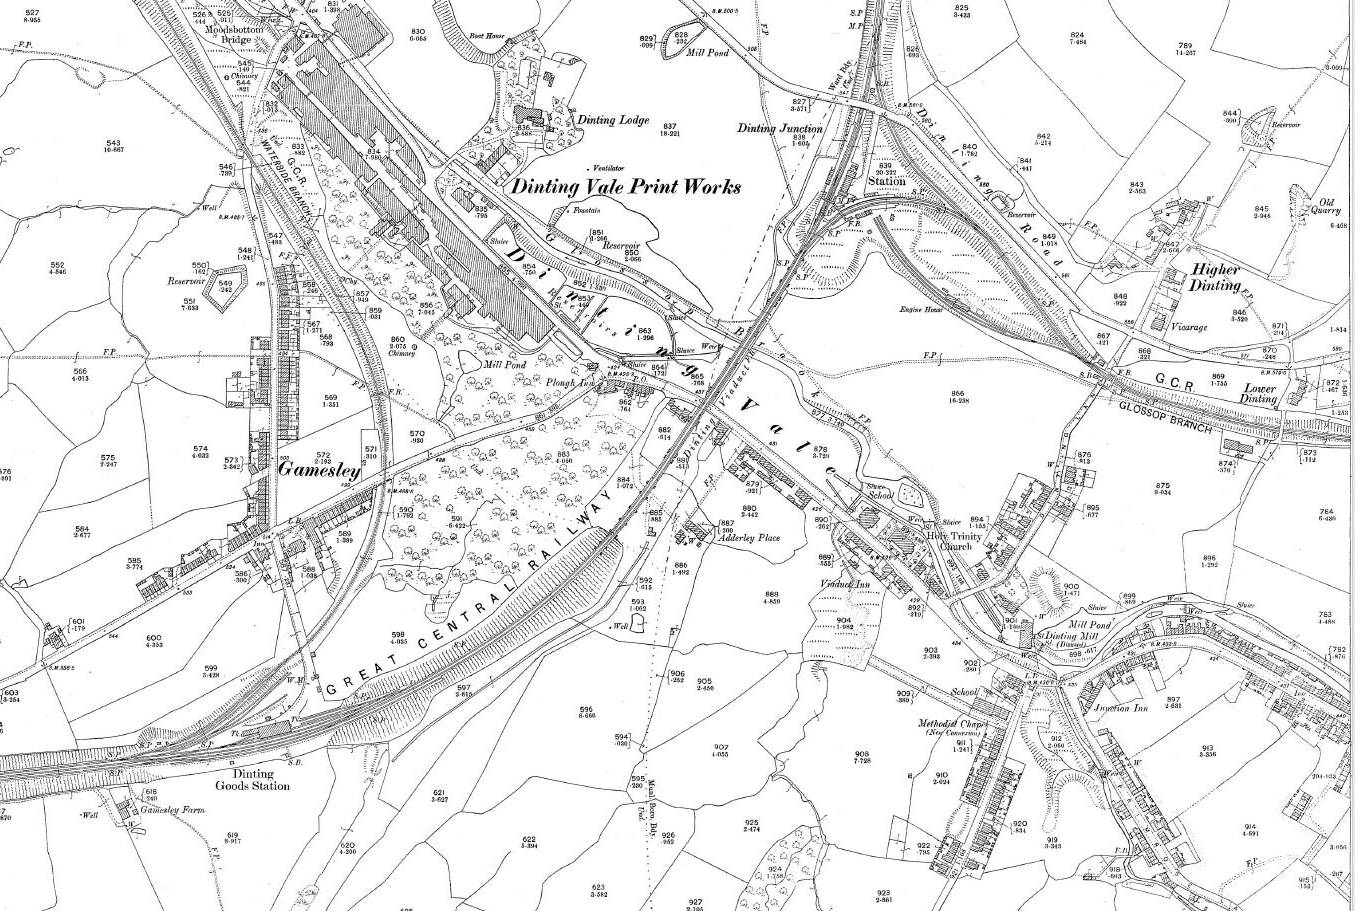 Extract from the 1897 OS Map